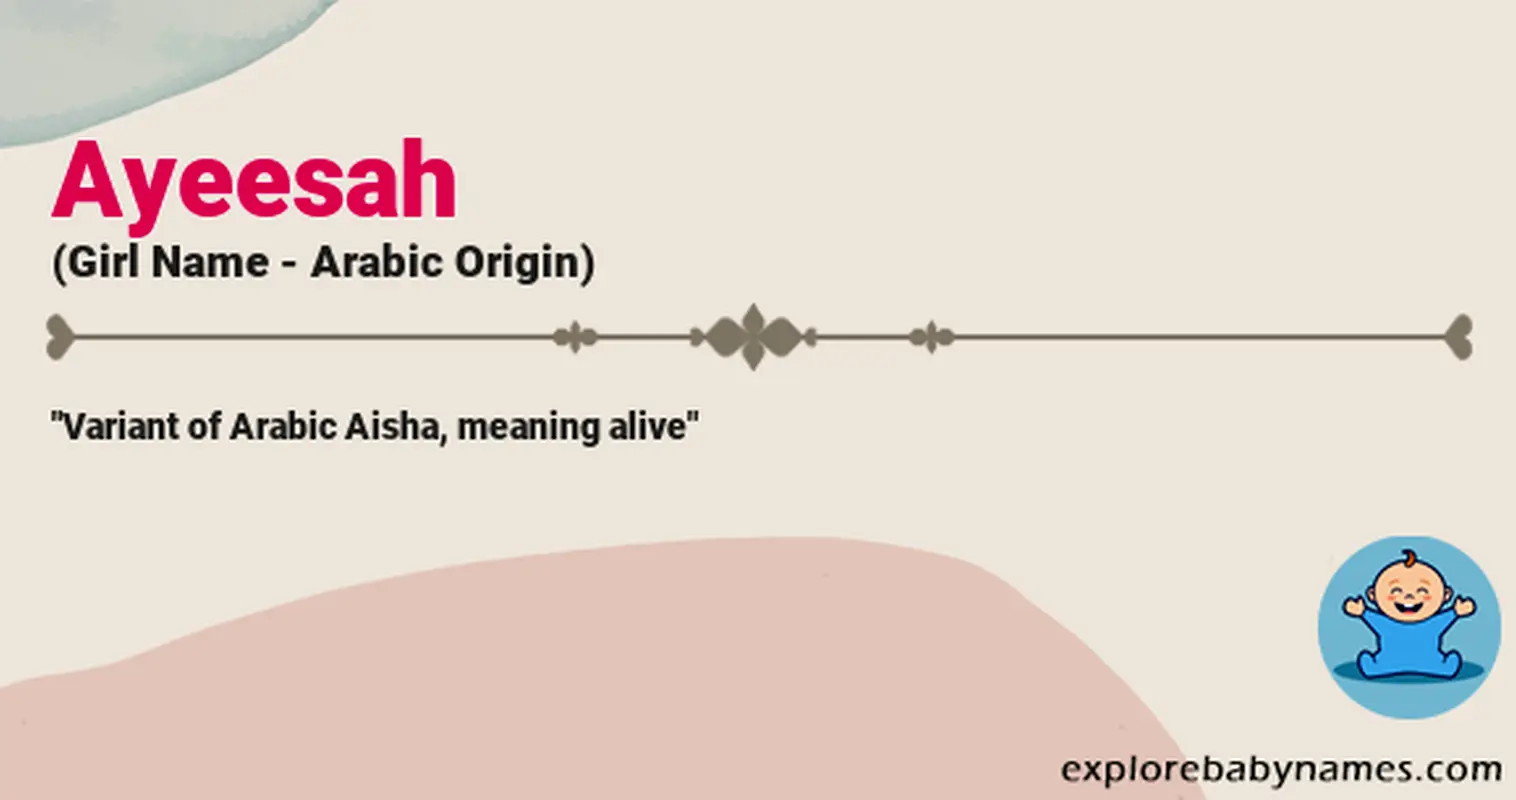 Meaning of Ayeesah